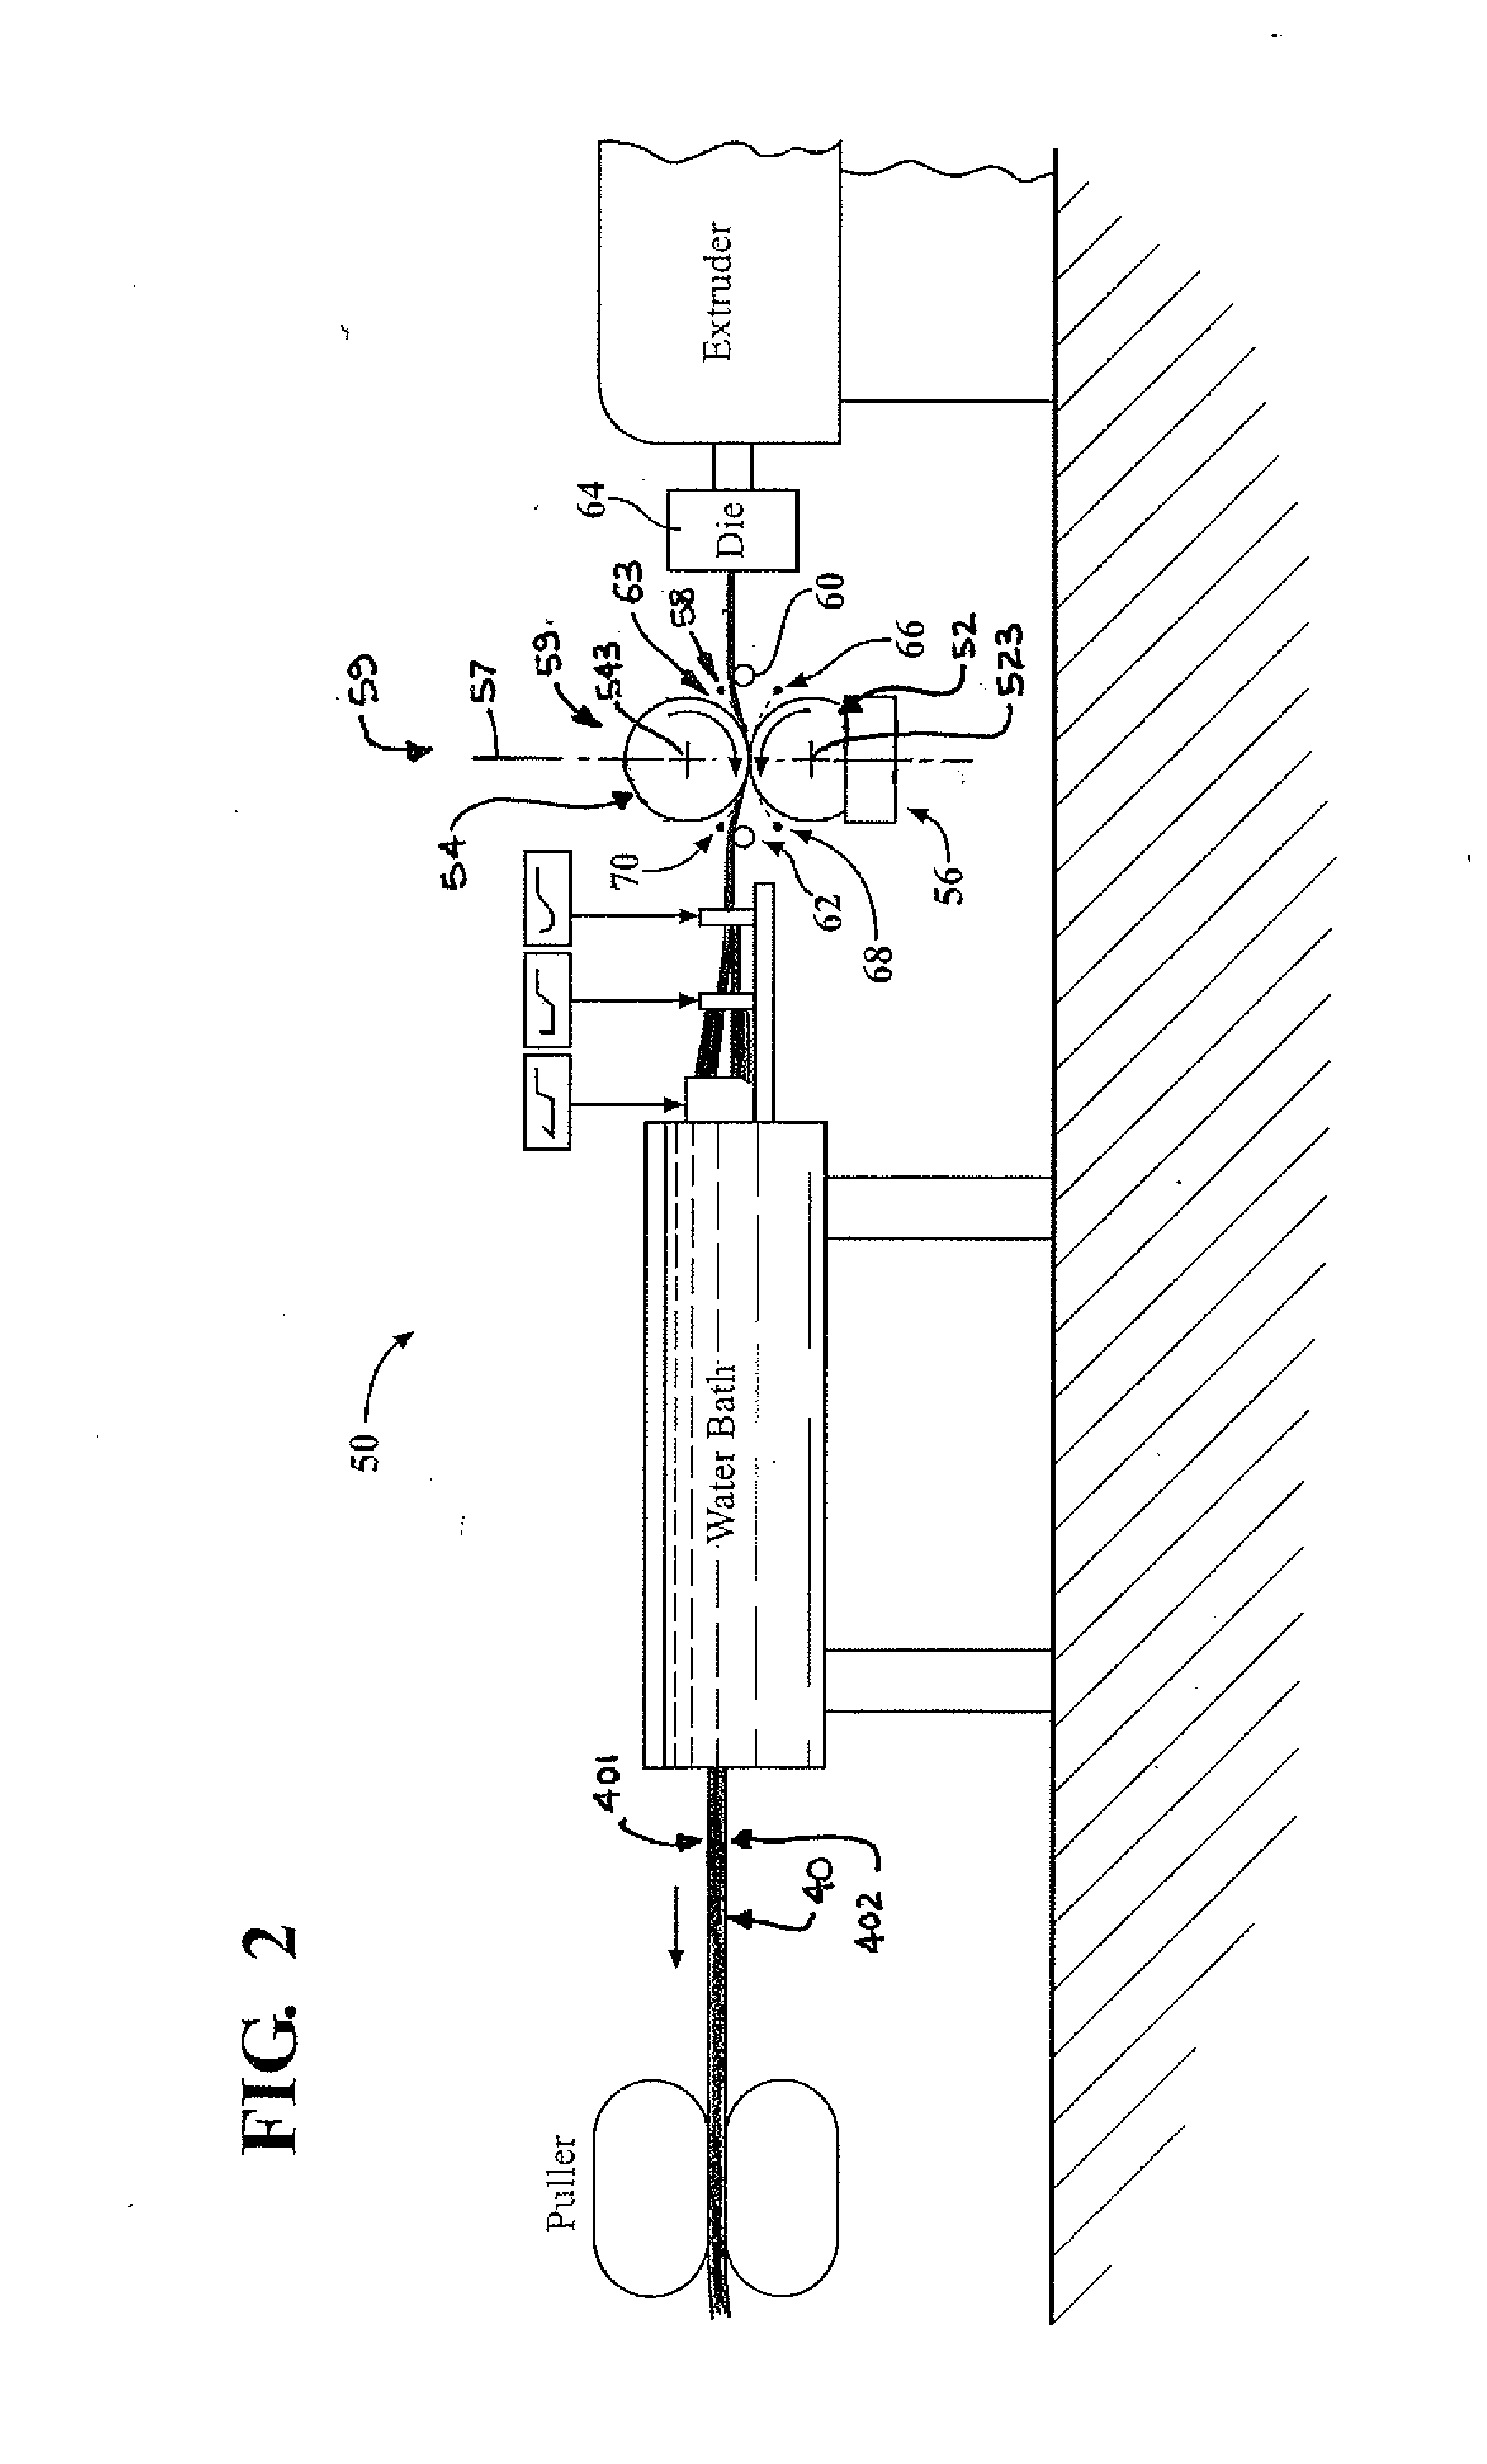 System and method for manufacturing a rough textured molded plastic siding product